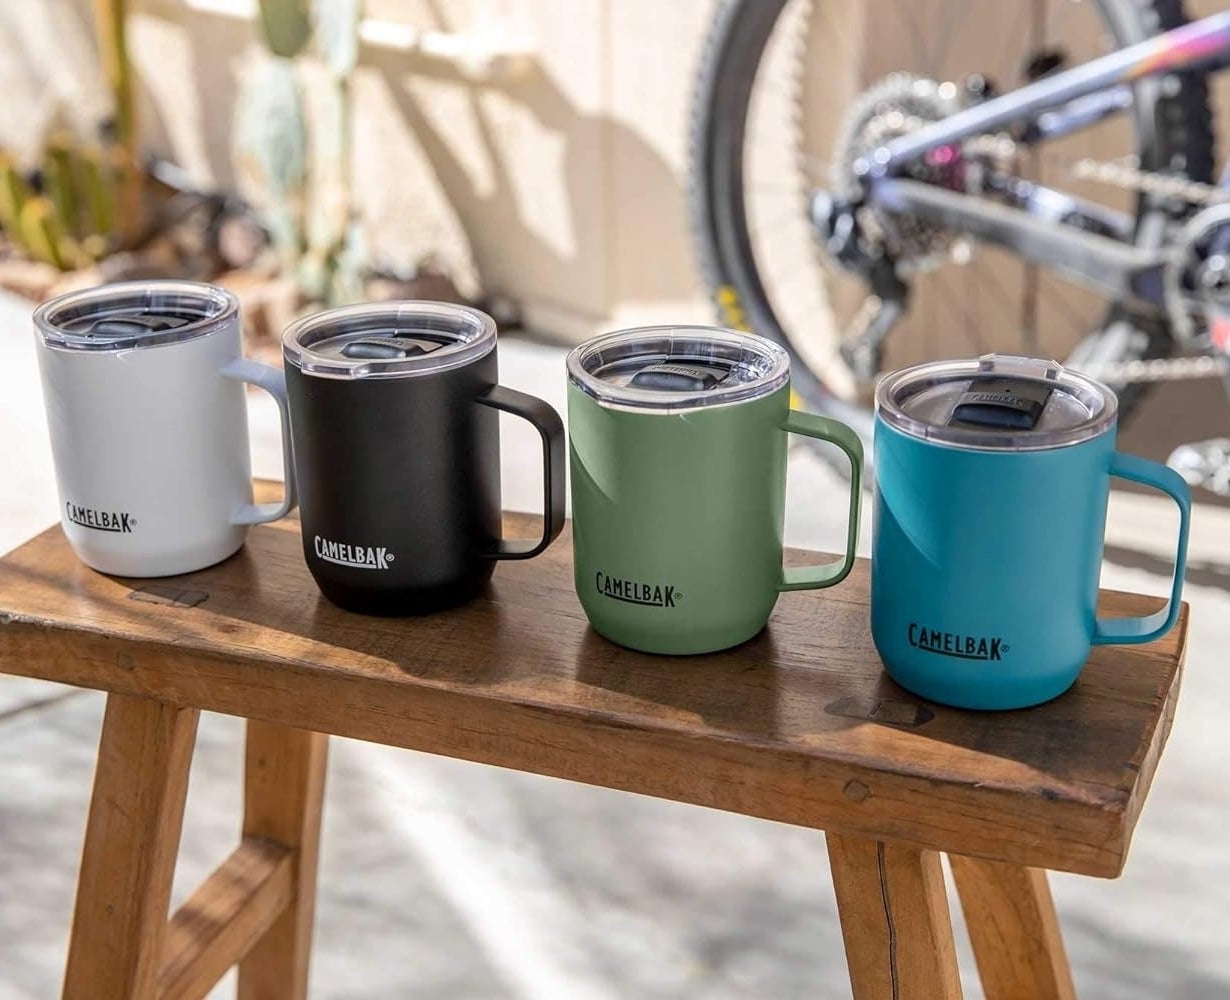 Four CamelBak travel mugs in white, black, green and blue on a wooden stool outdoors, with a bike in the background